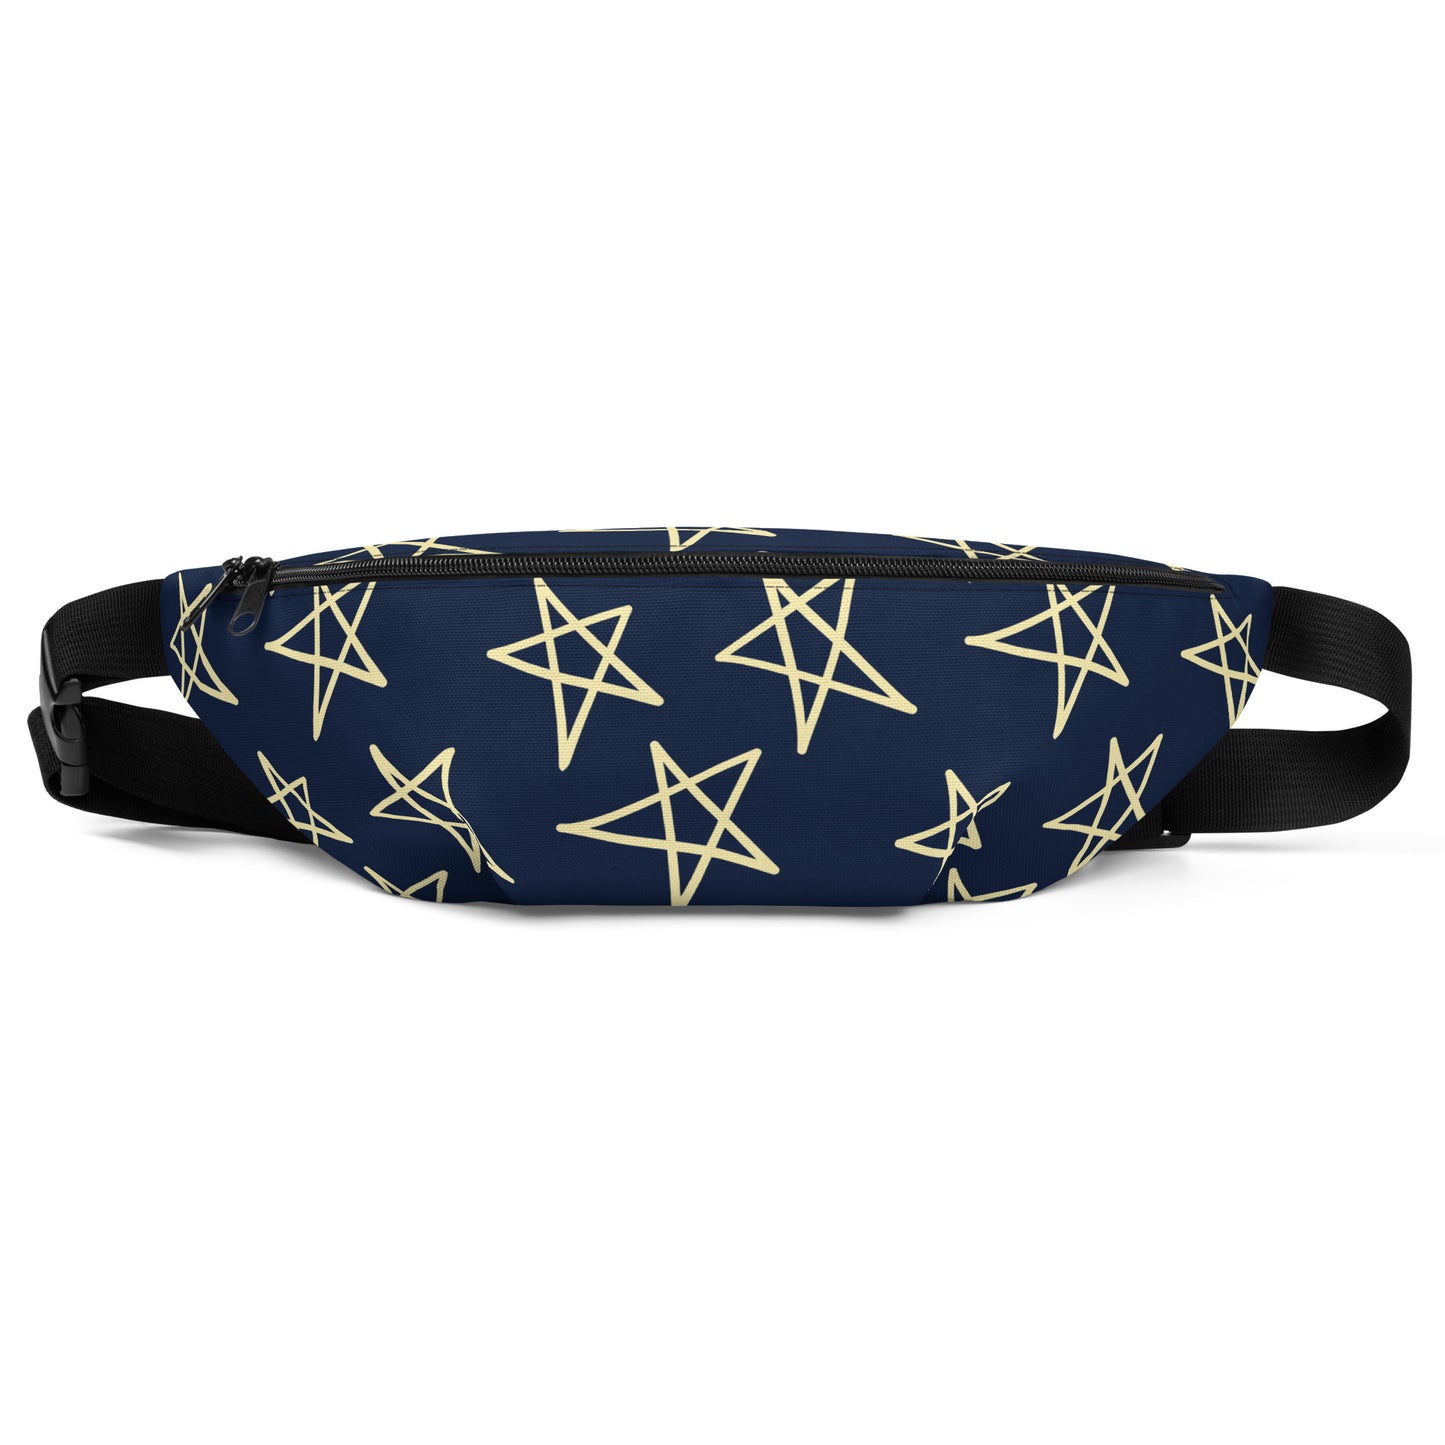 All Star Fanny Pack